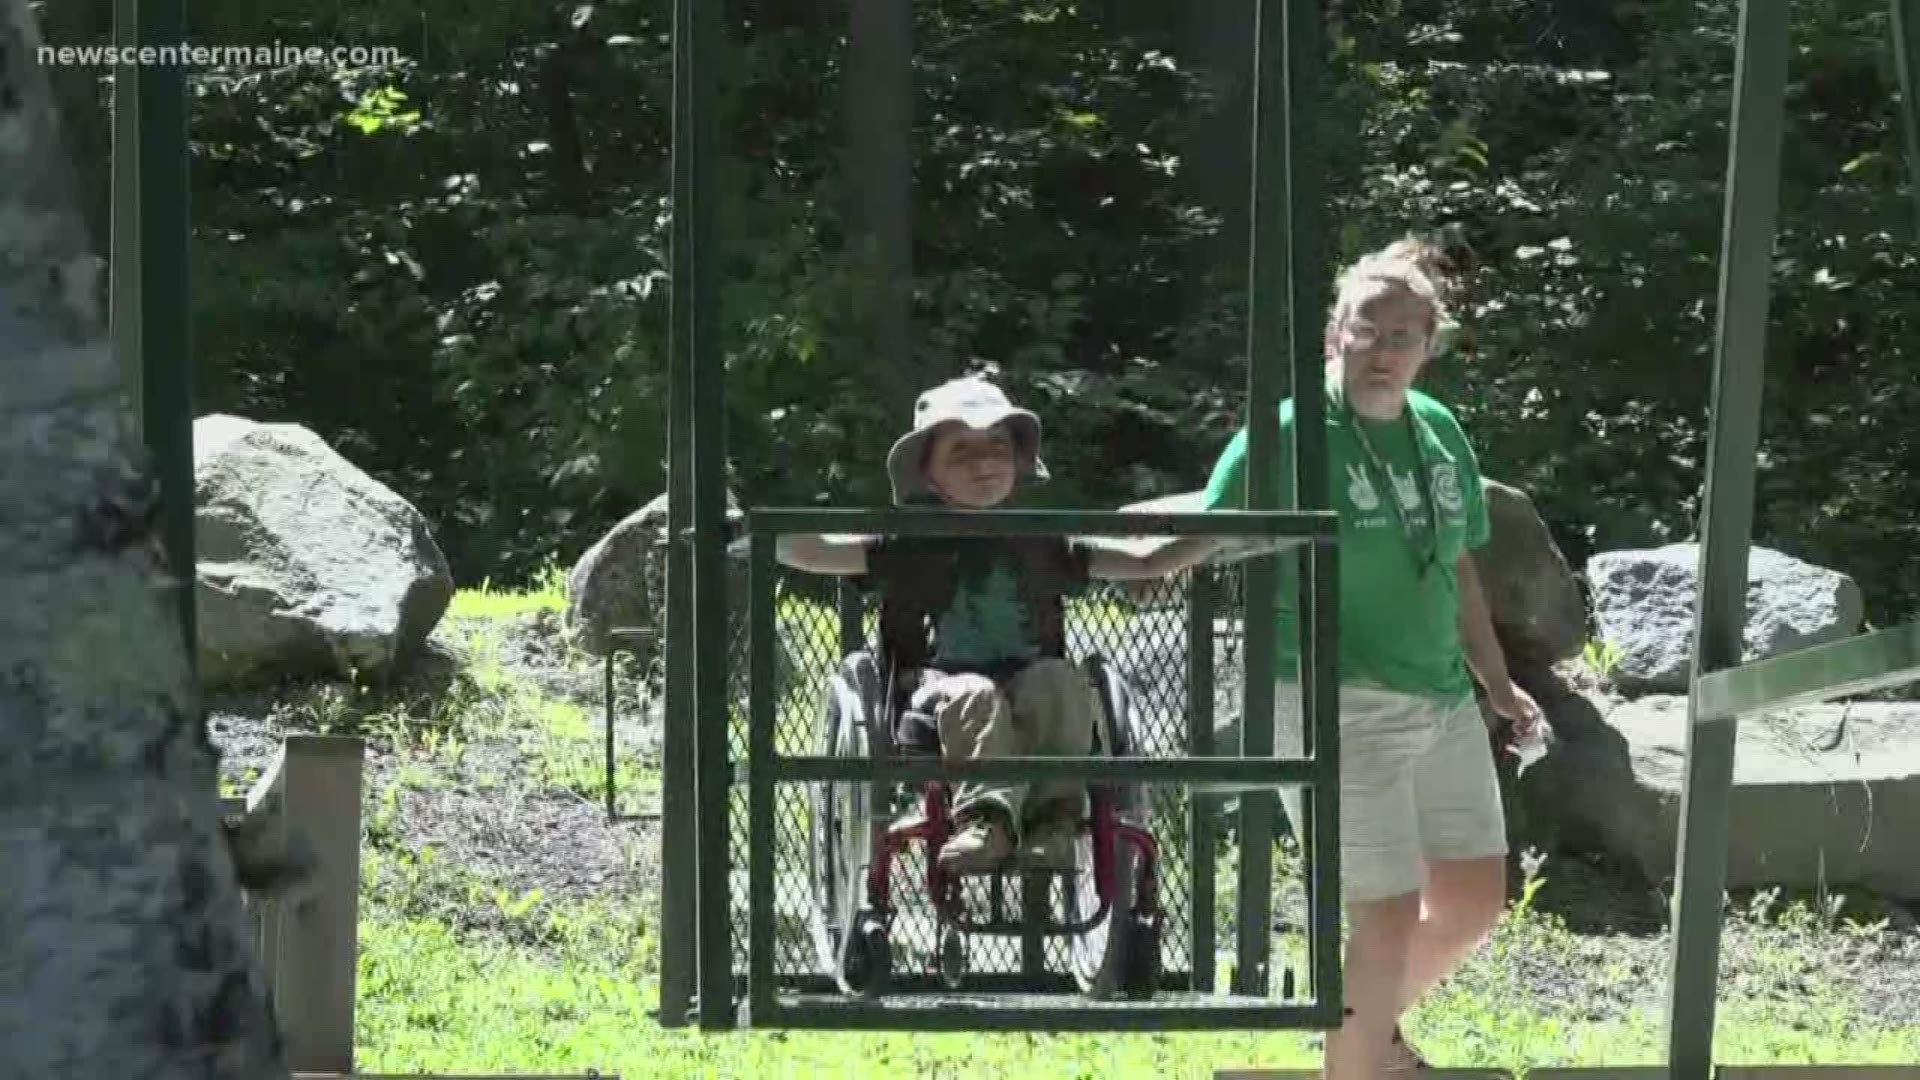 'Pine Tree Camp' in Rome is a place for children and adults with disabilities to experience summer camp.